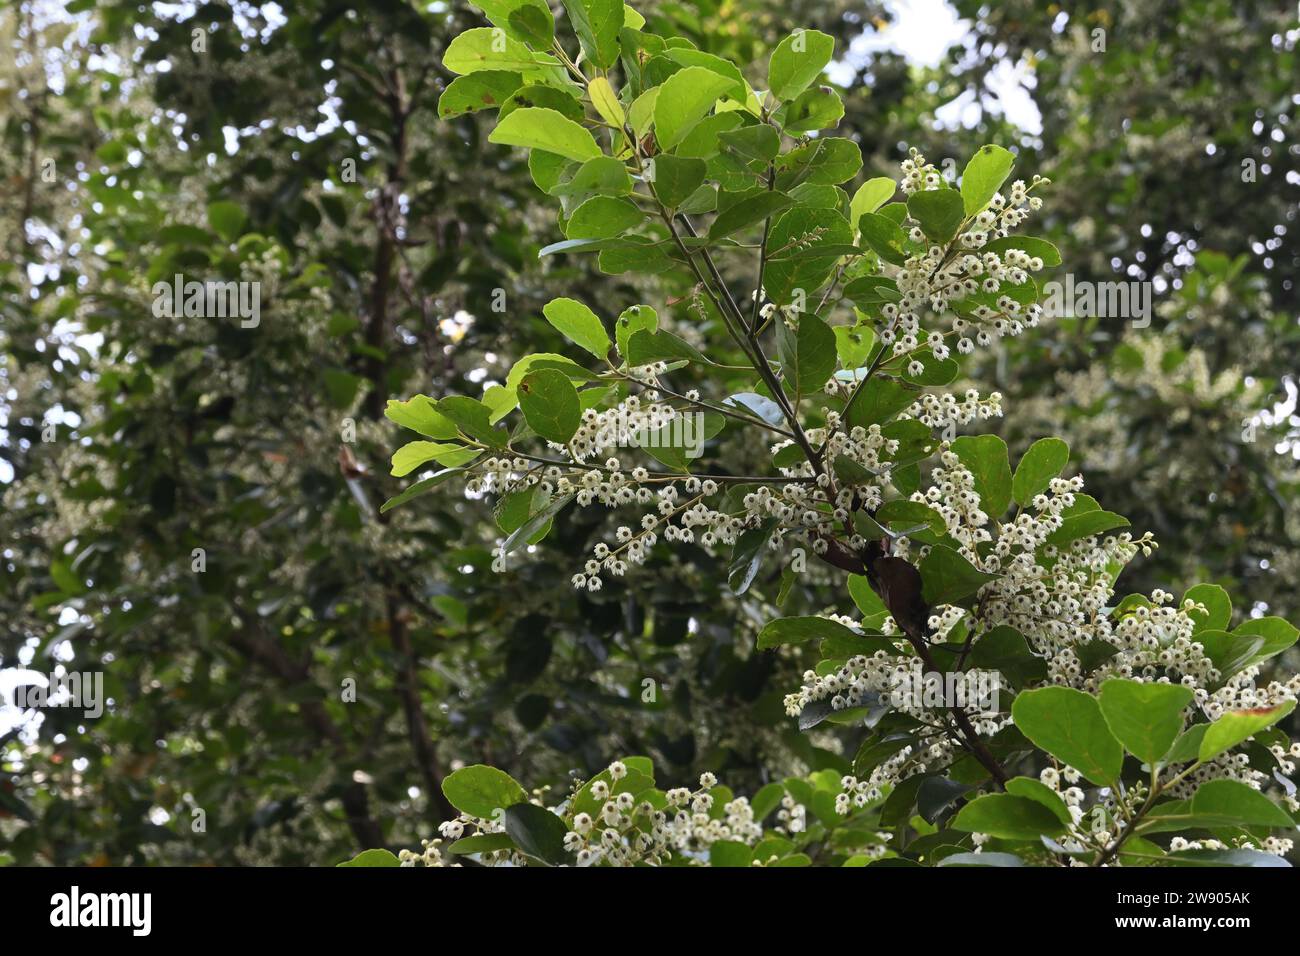 View of an elevated Ceylon olive twig (Elaeocarpus Serratus) with numerous tiny white flowers blooming as the groups Stock Photo